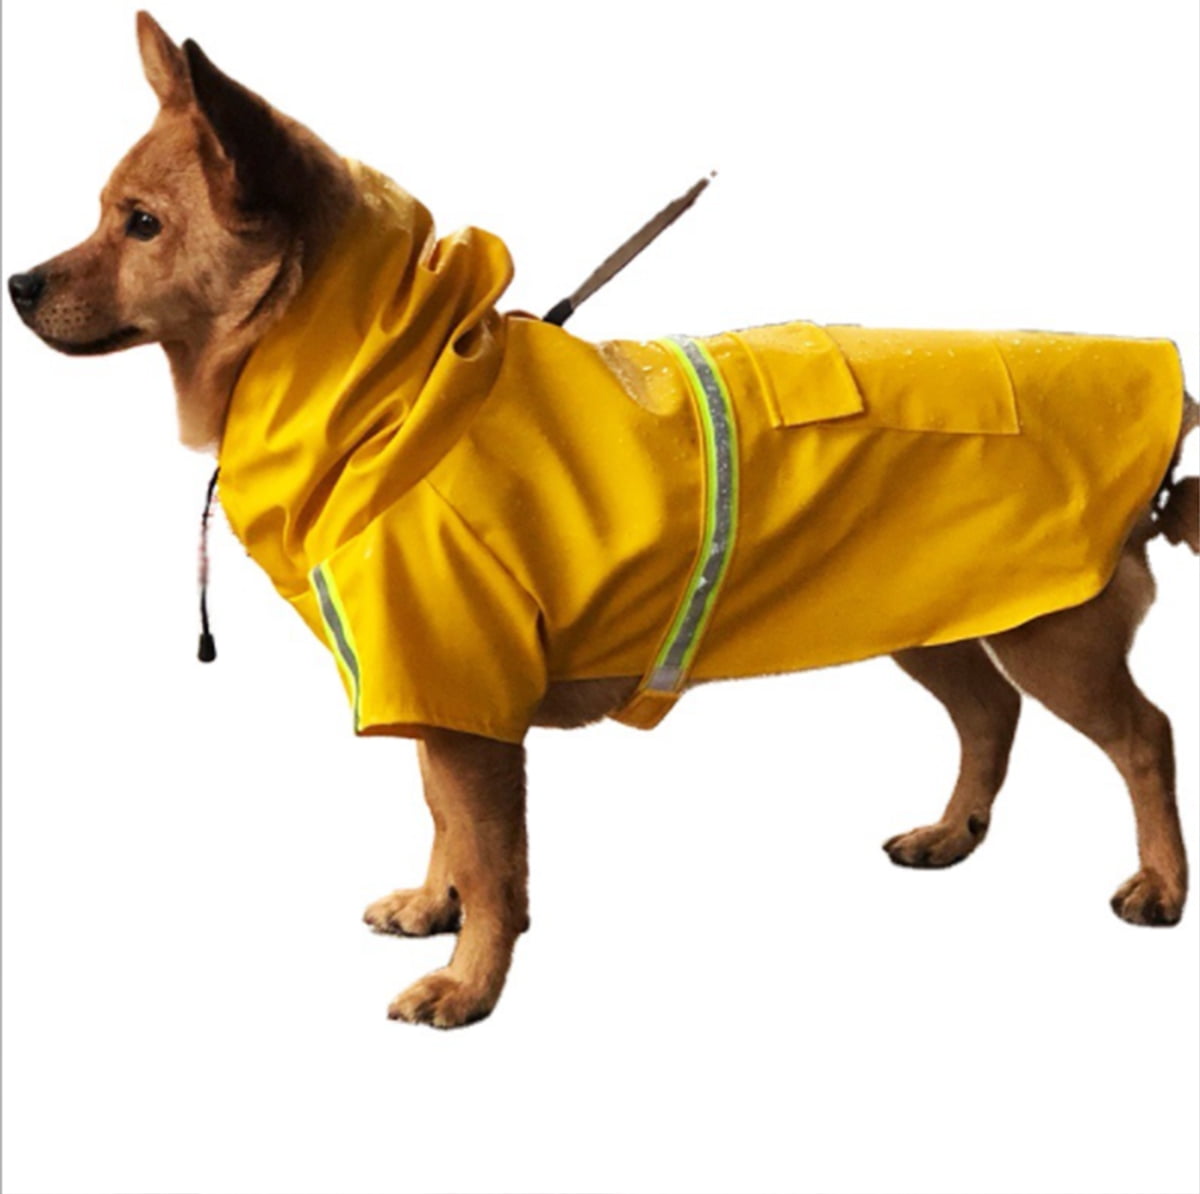 rain snow jacket Yellow Dog raincoat zipper in back waterproof jumpsuit with collar hole and reflective trim Xsmall